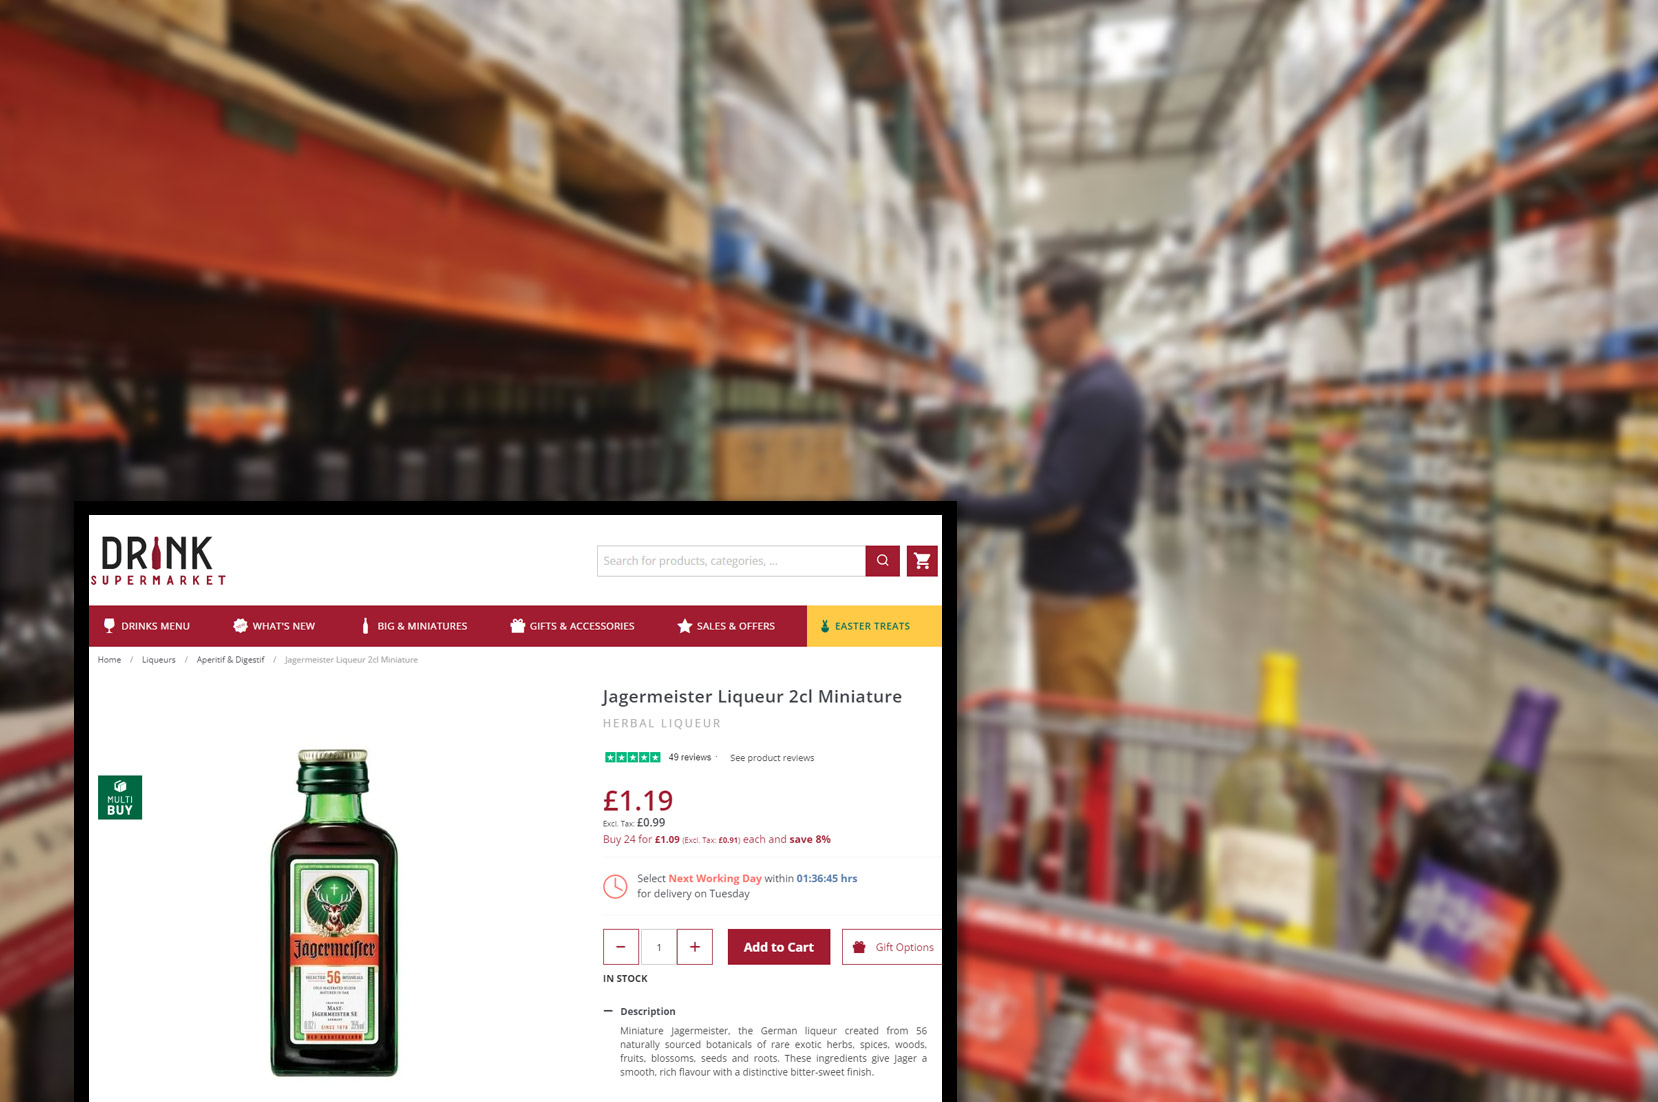 drinksupermarket-comproduct-pricing-information-and-image-scraping-services